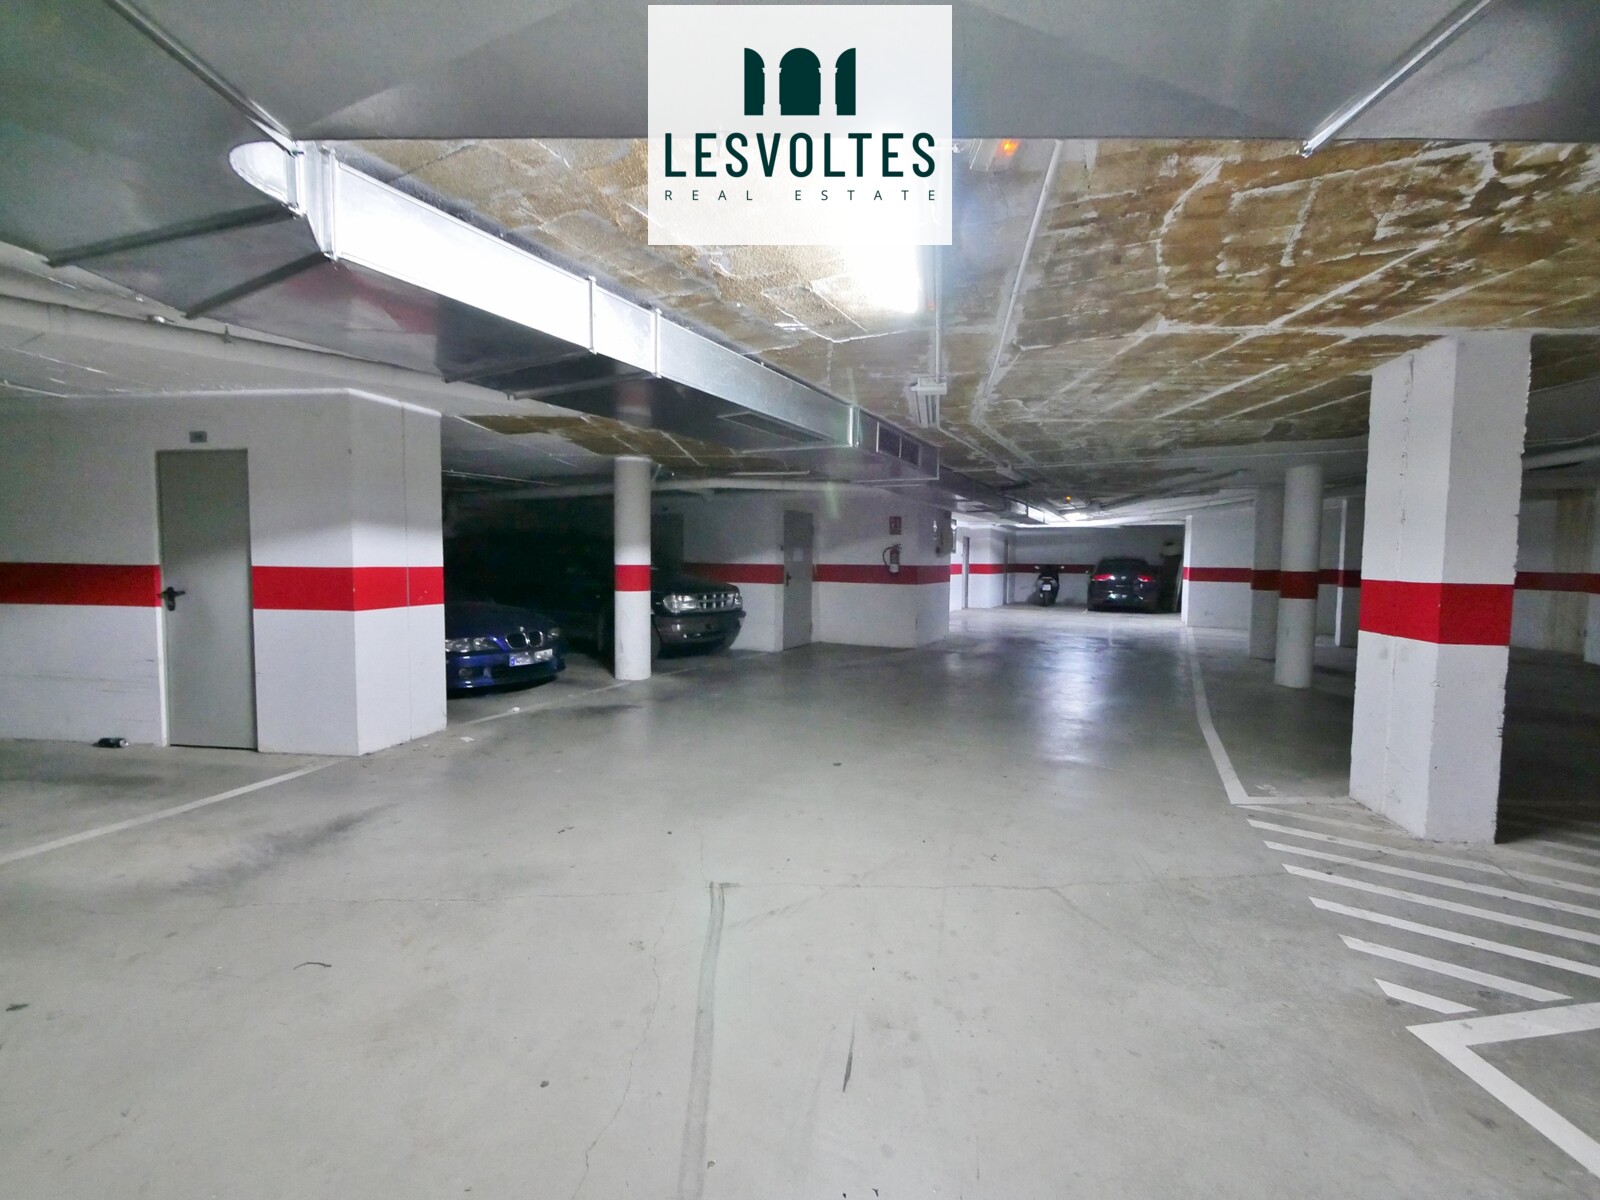 PARKING SPACE AND STORAGE ROOM FOR SALE IN FORALLAC.